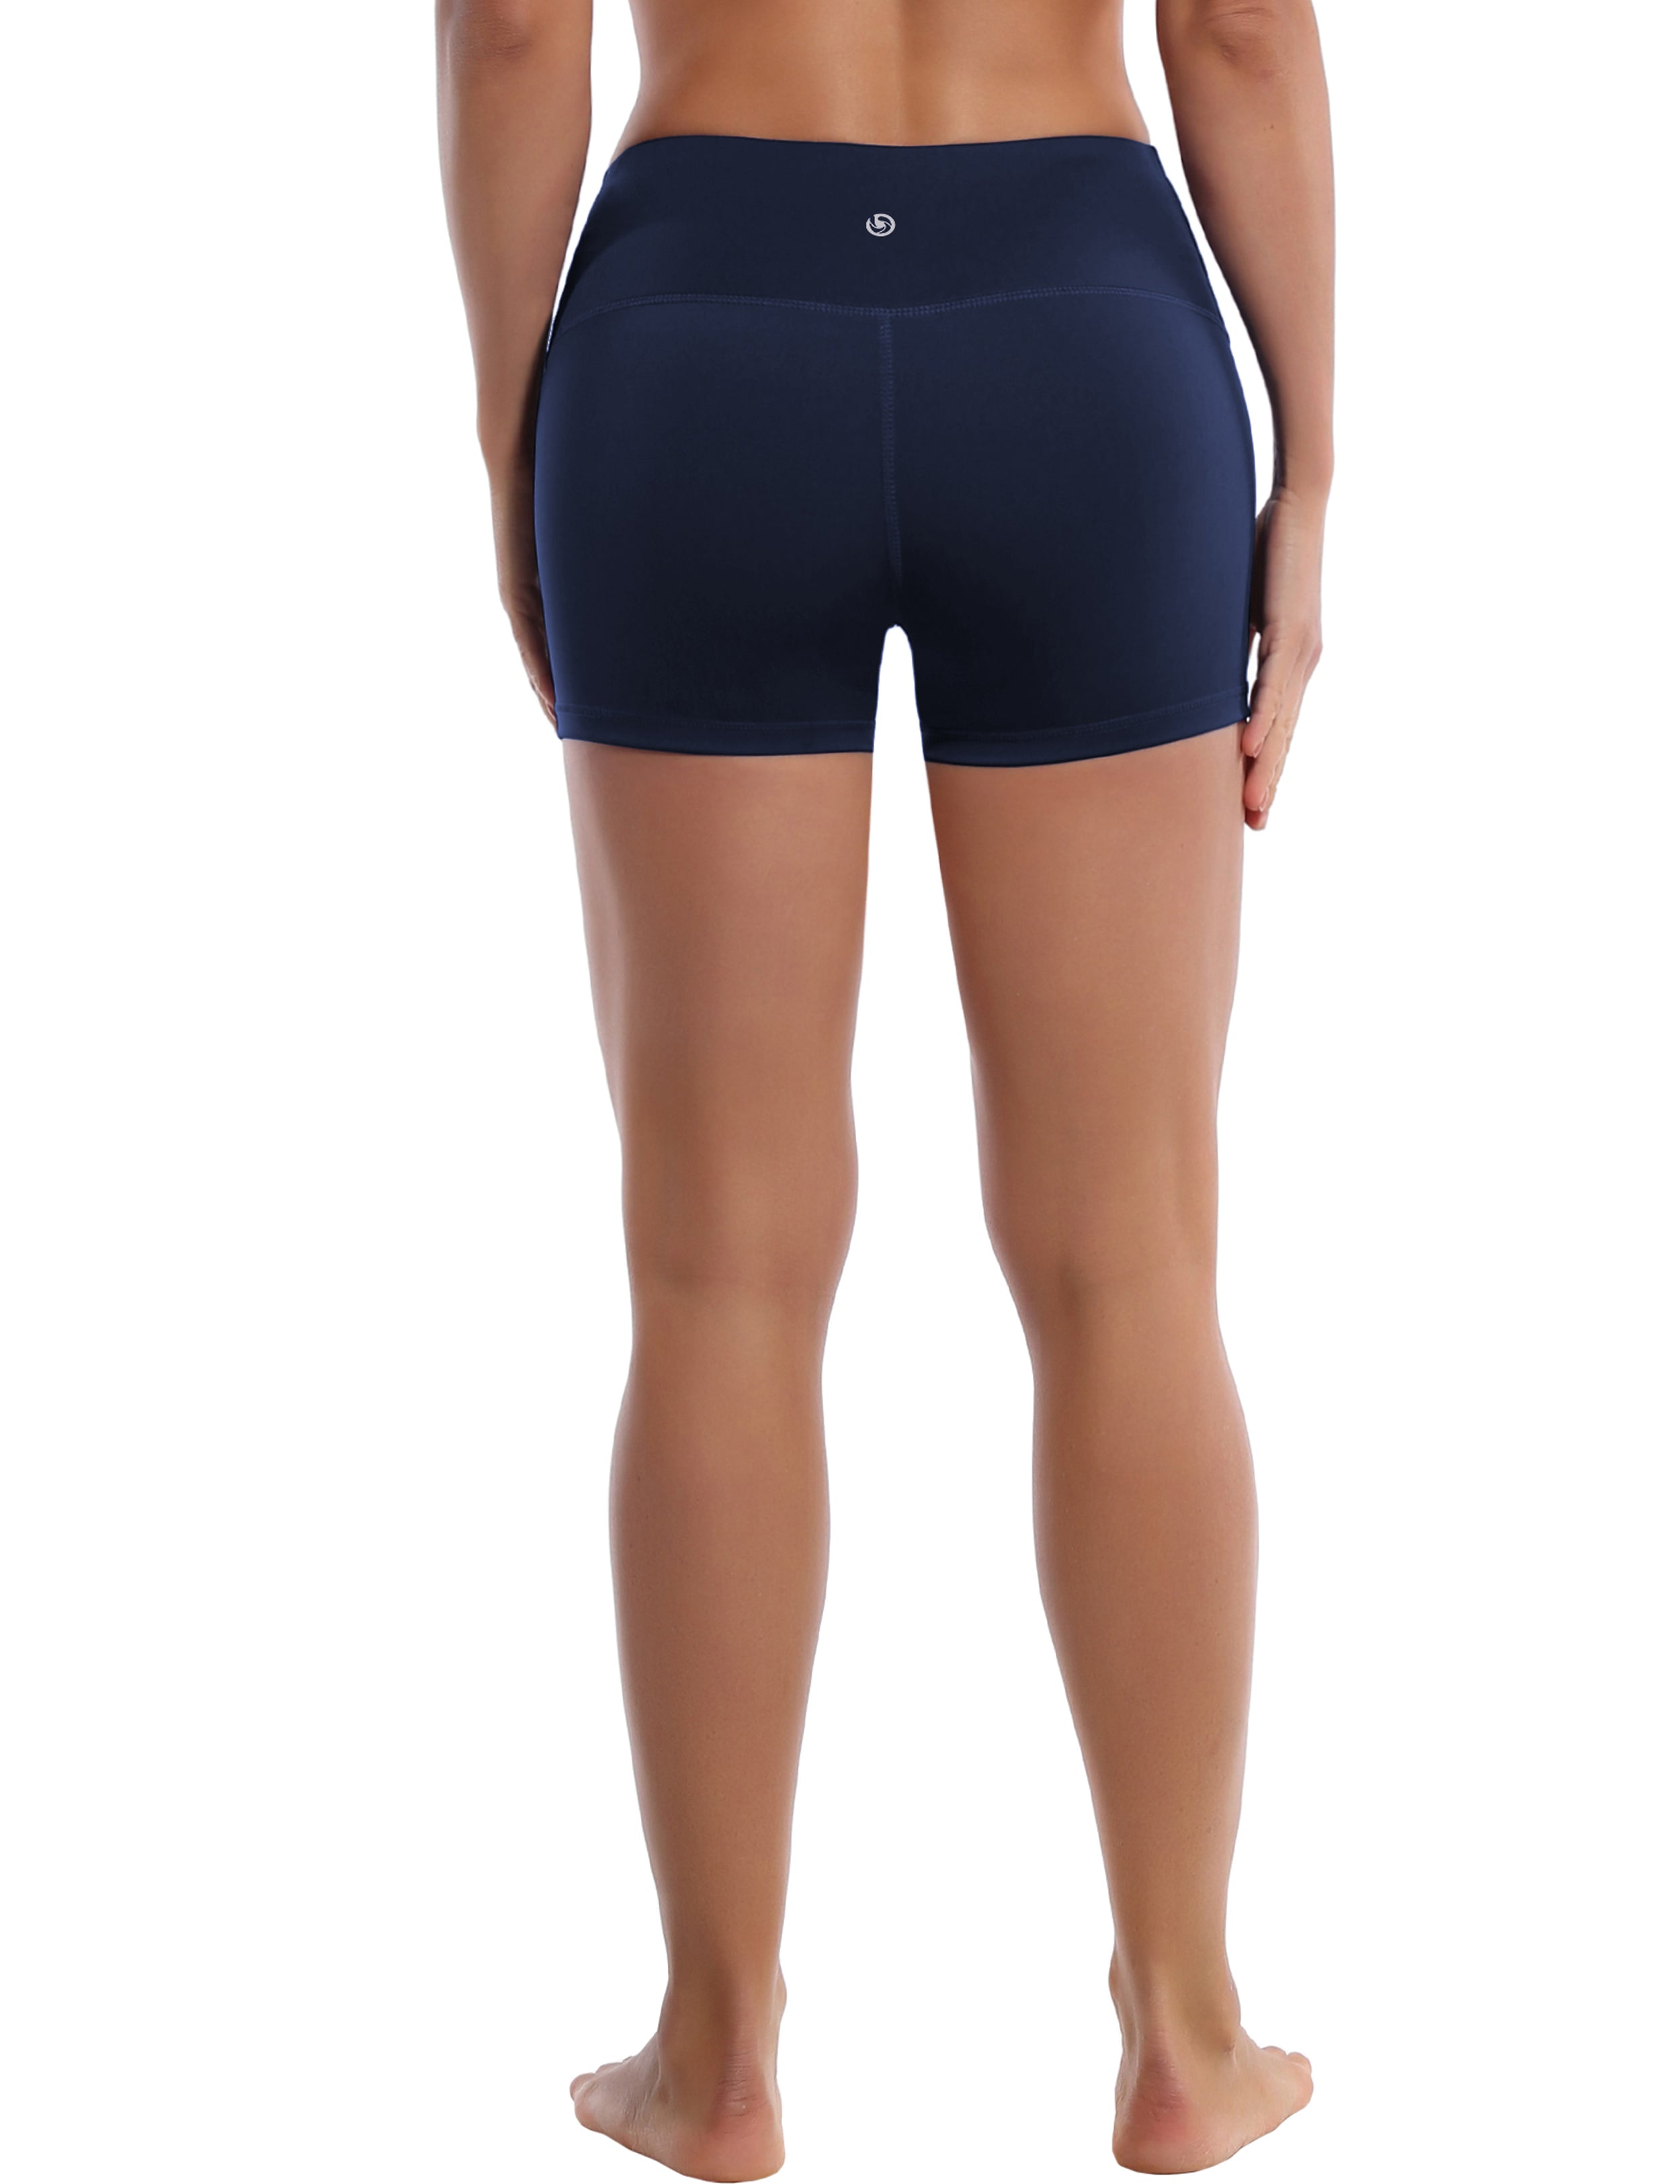 2.5" Pilates Shorts darknavy Softest-ever fabric High elasticity High density 4-way stretch Fabric doesn't attract lint easily No see-through Moisture-wicking Machine wash 75% Nylon, 25% Spandex